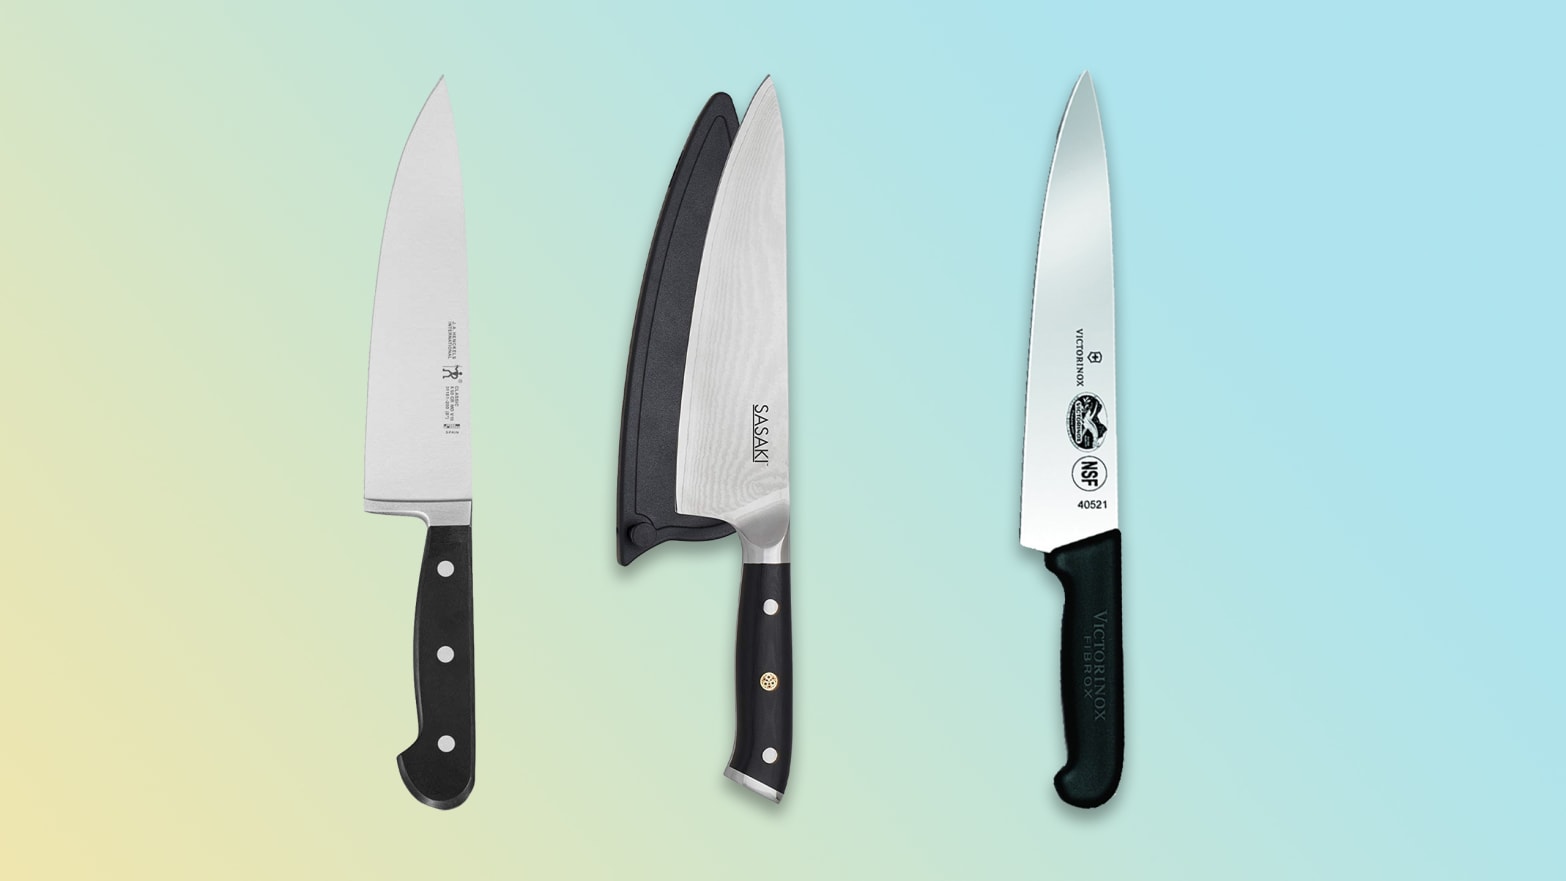 How to Care For and Maintain Your Kitchen Knives? (8 Mistakes to Avoid -  IMARKU